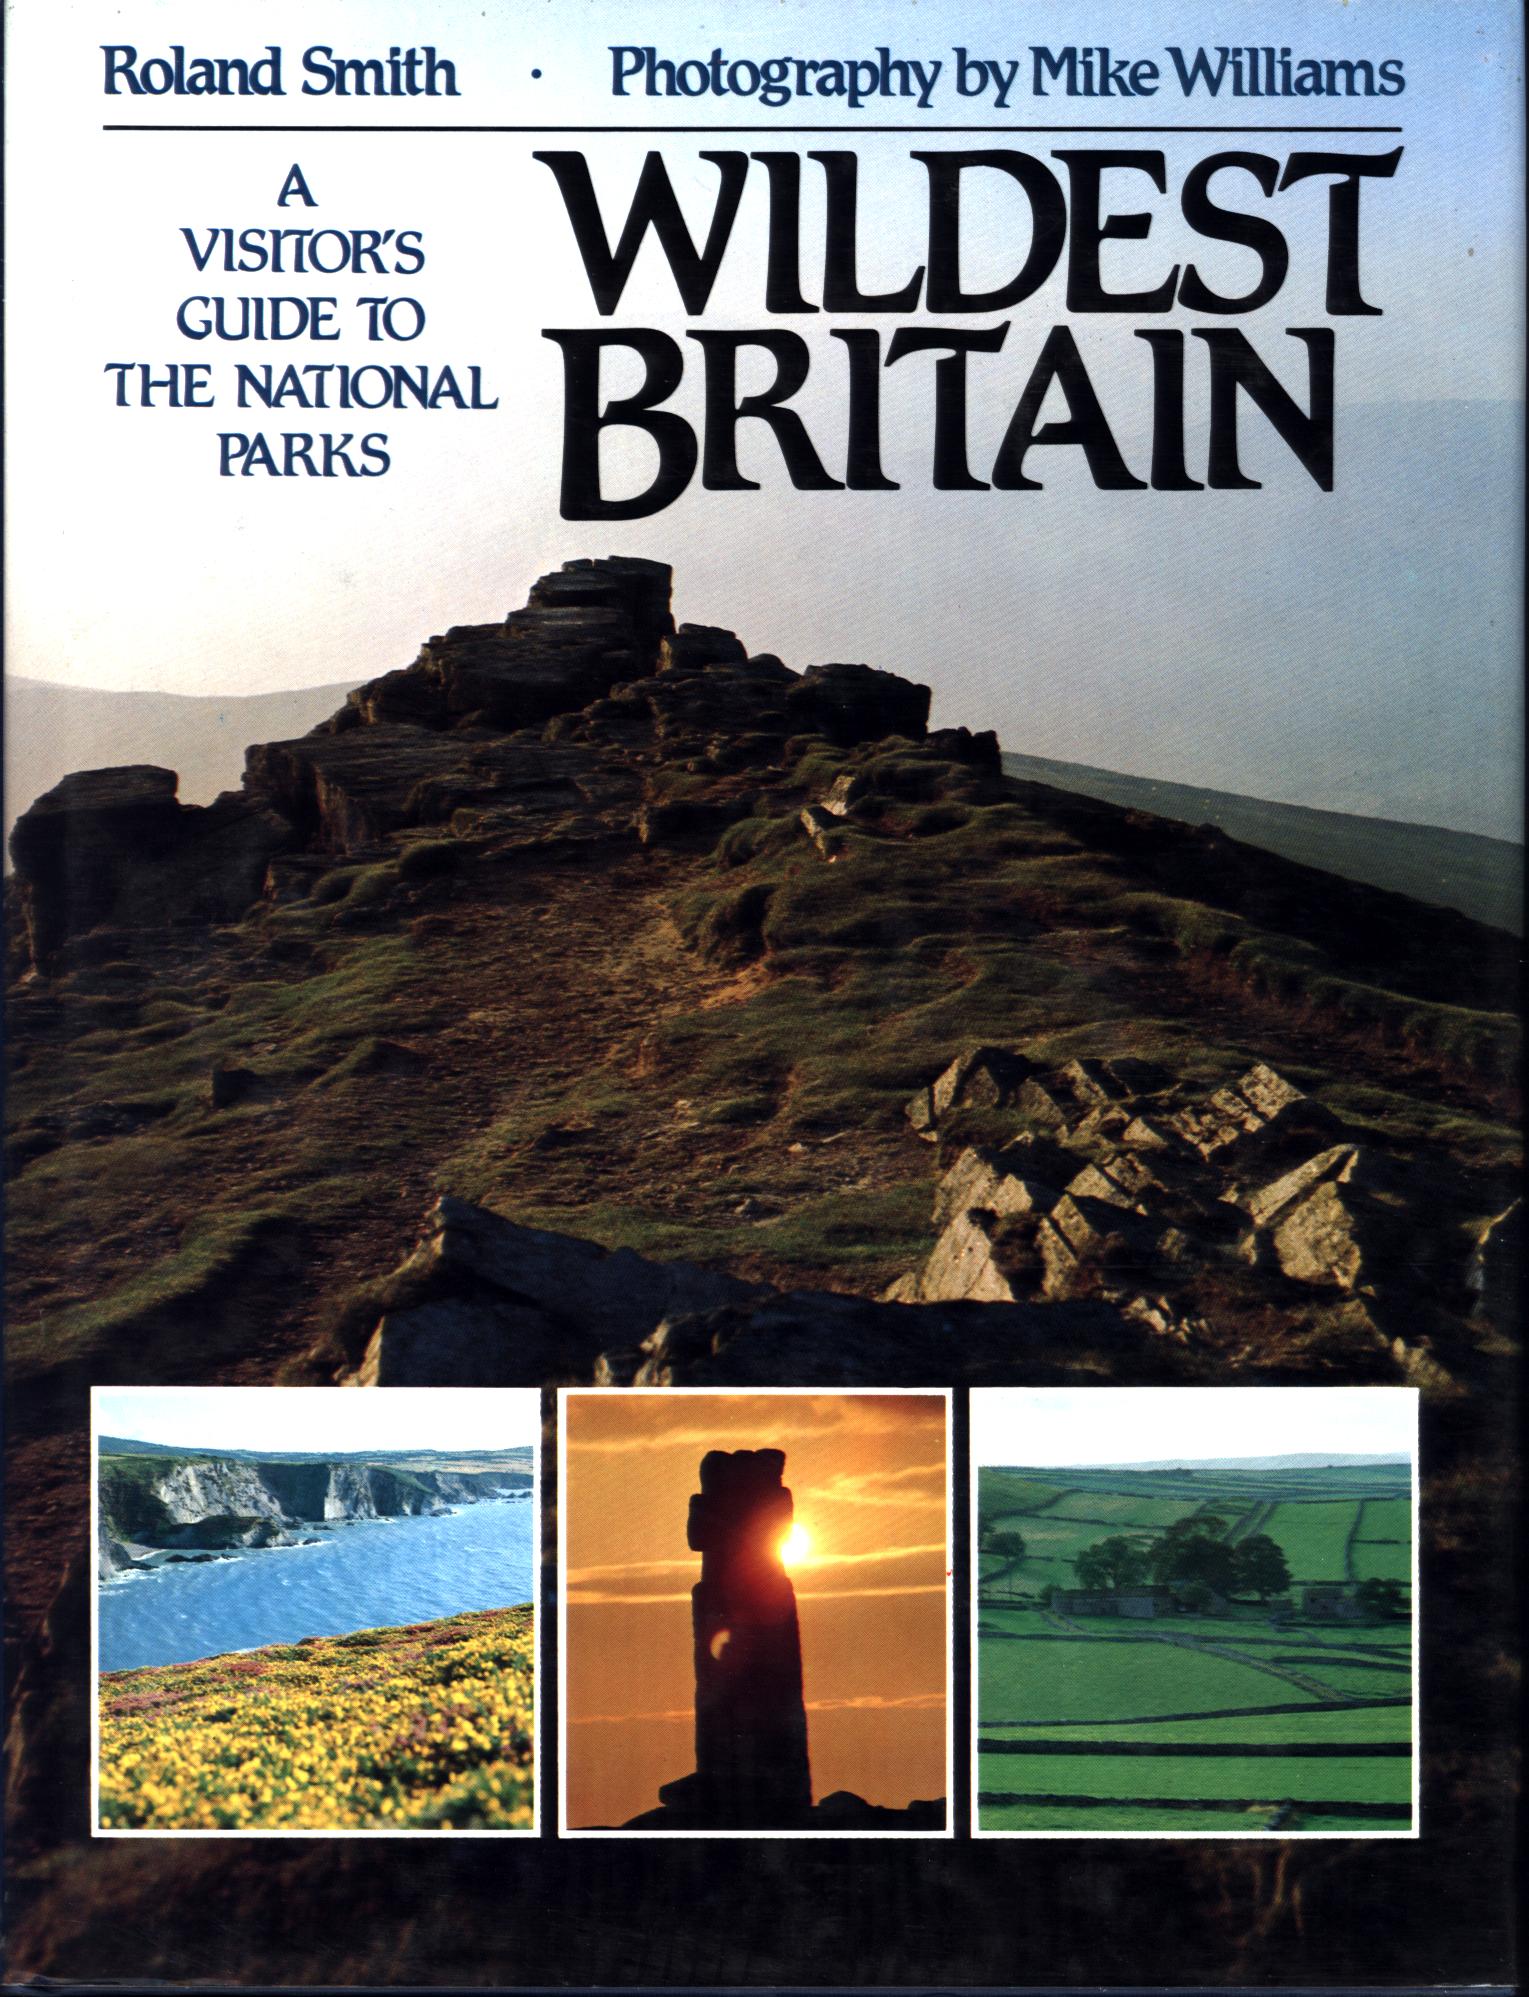 WILDEST BRITAIN: a visitor's guide to the national parks.